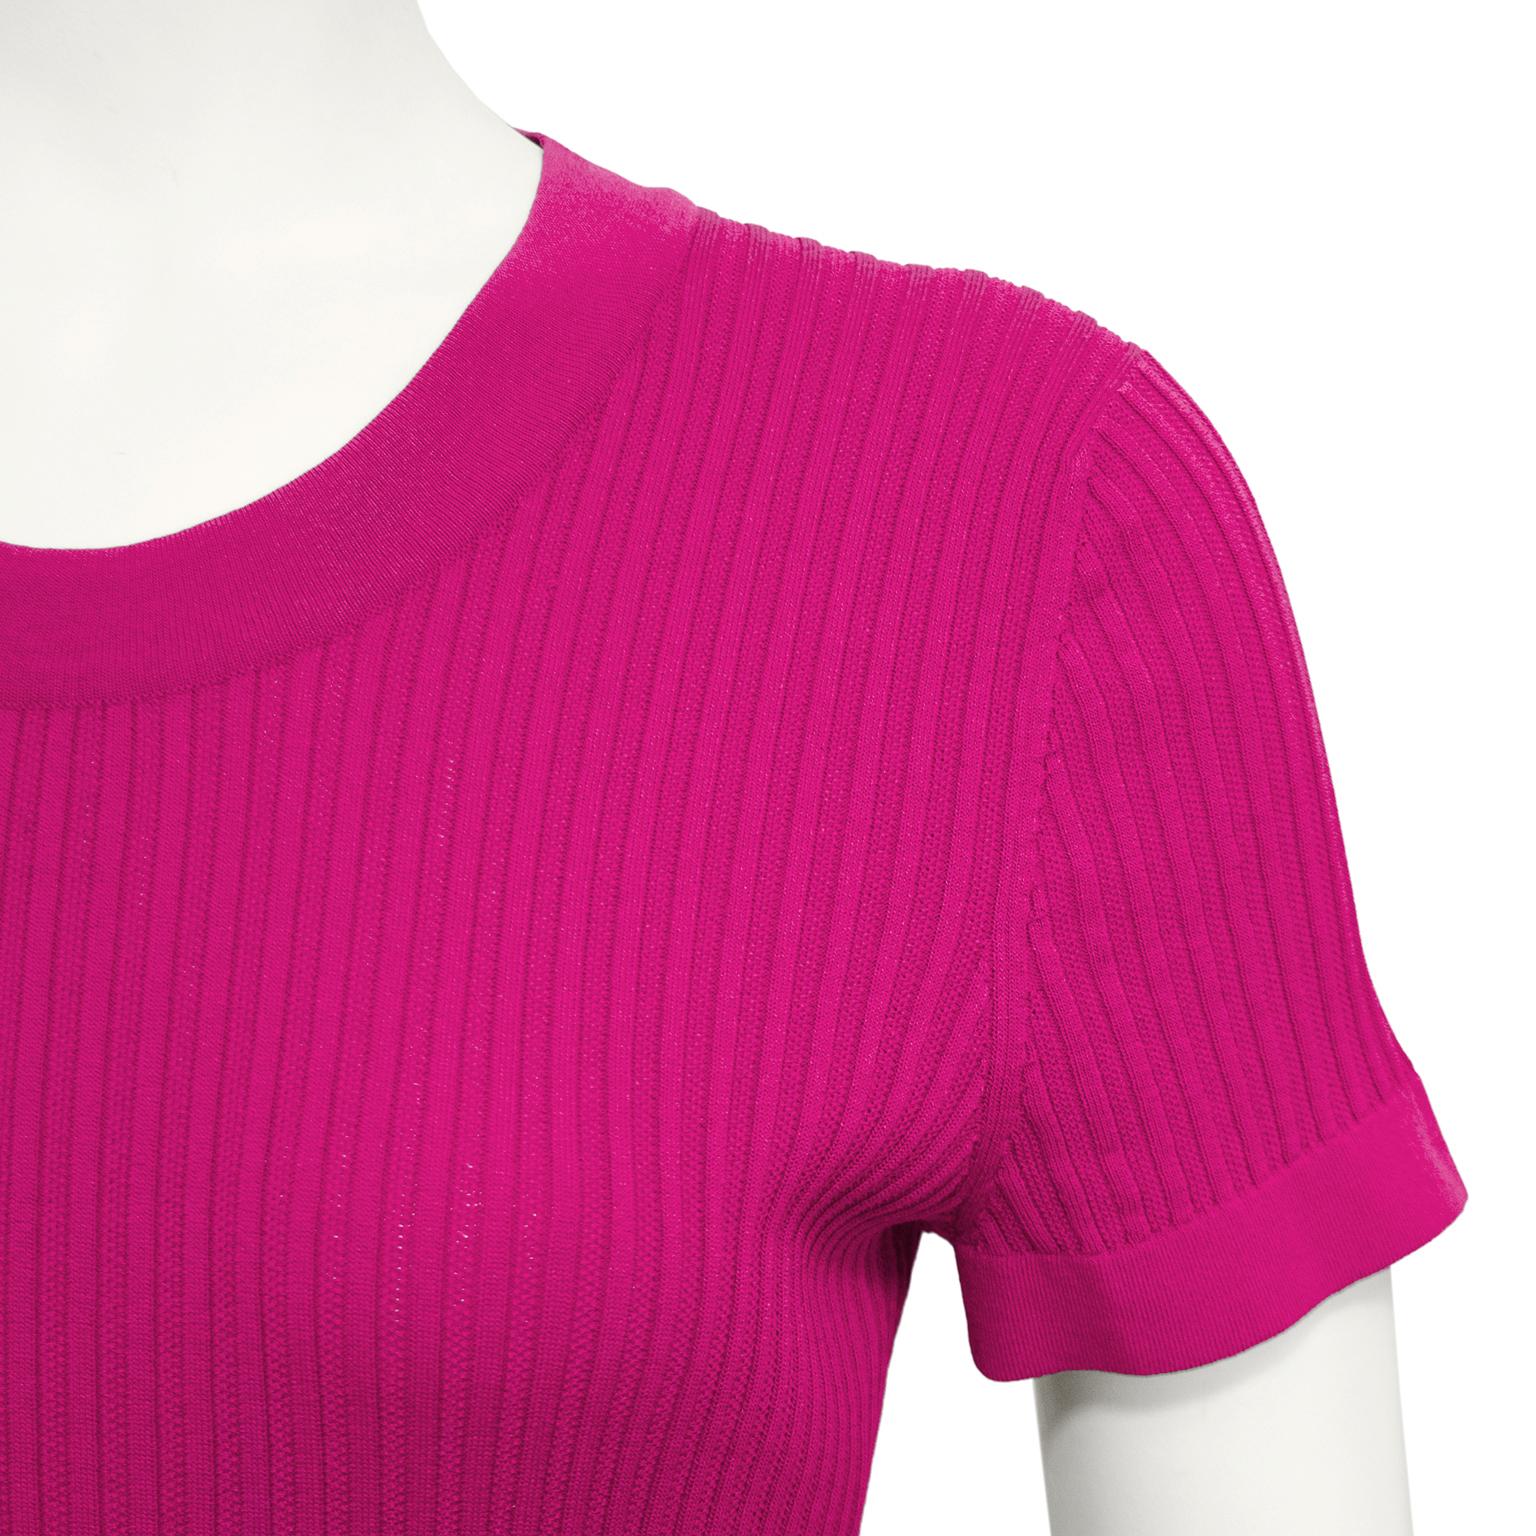 Resort 2011 Chanel Dark Magenta Ribbed Knit Dress  In Good Condition For Sale In Toronto, Ontario